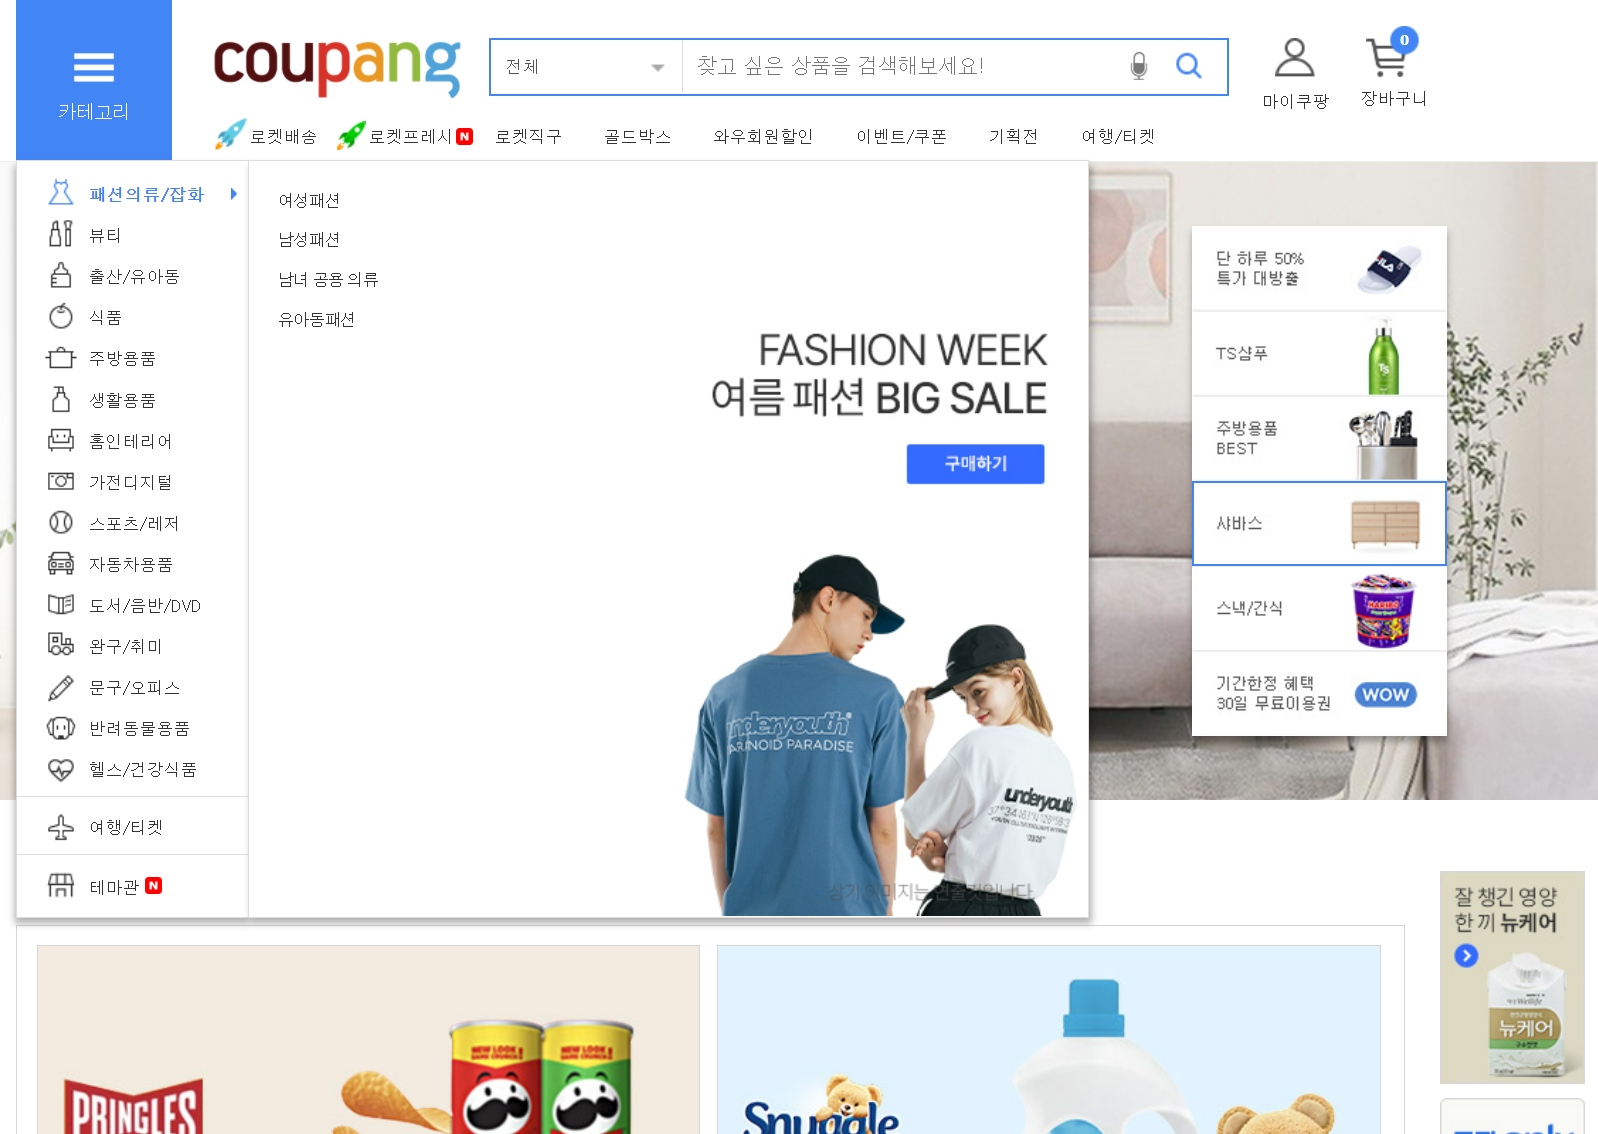 how to buy from coupang